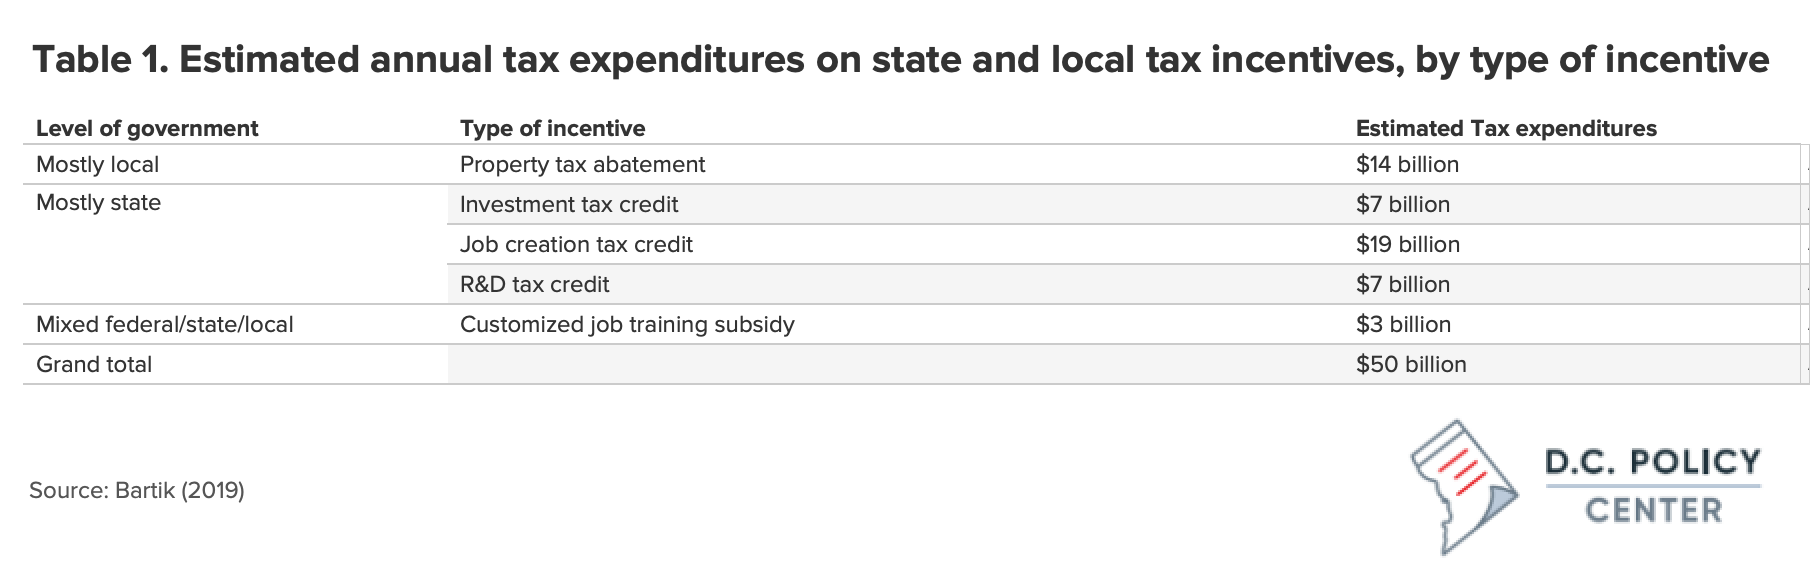 Table 1: showing breakdown of state and local tax incentives, totaling $50 billion